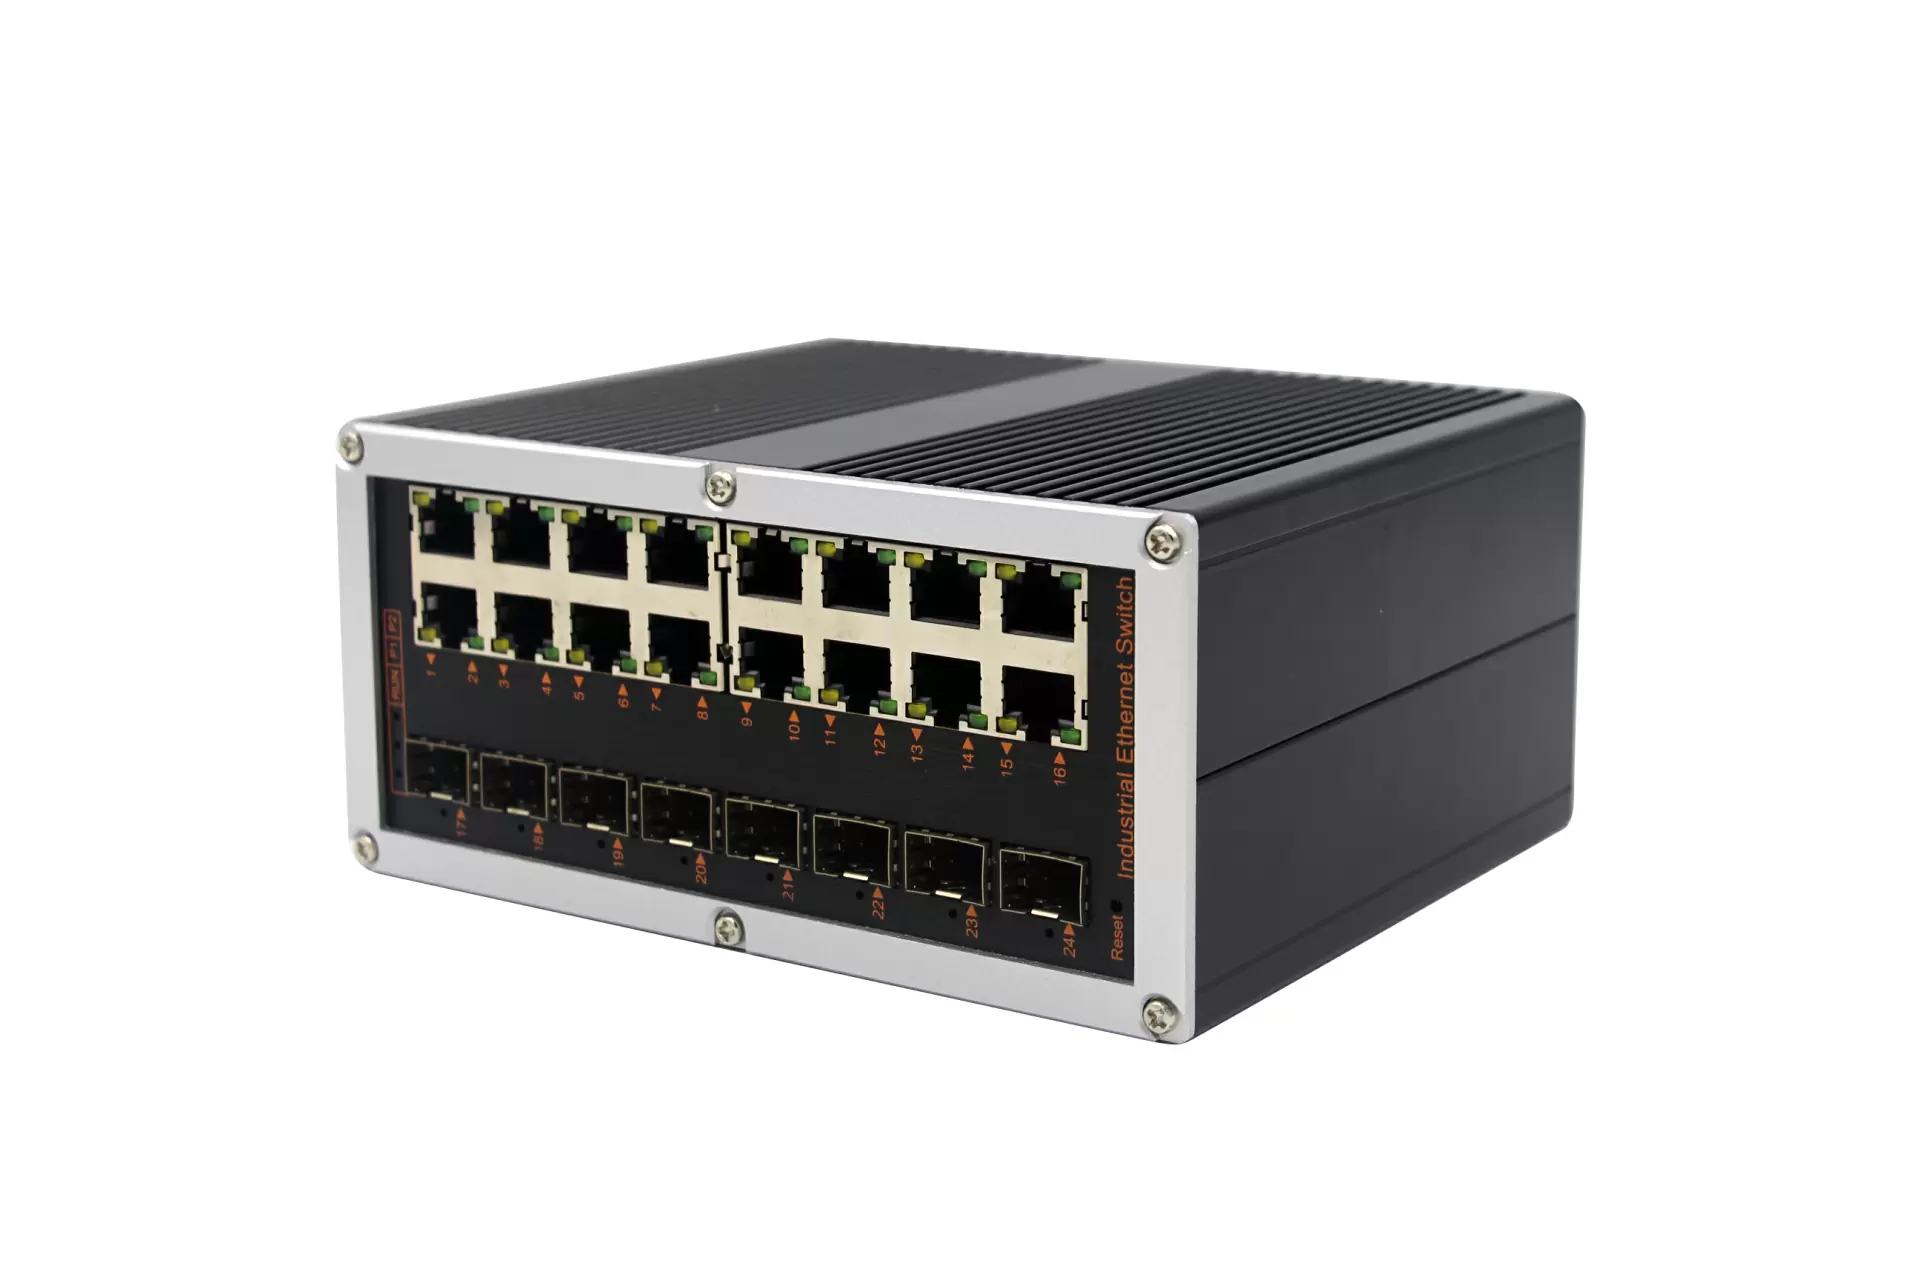 How Does a Port Ethernet Switch Handle Network Traffic and Data Flow?